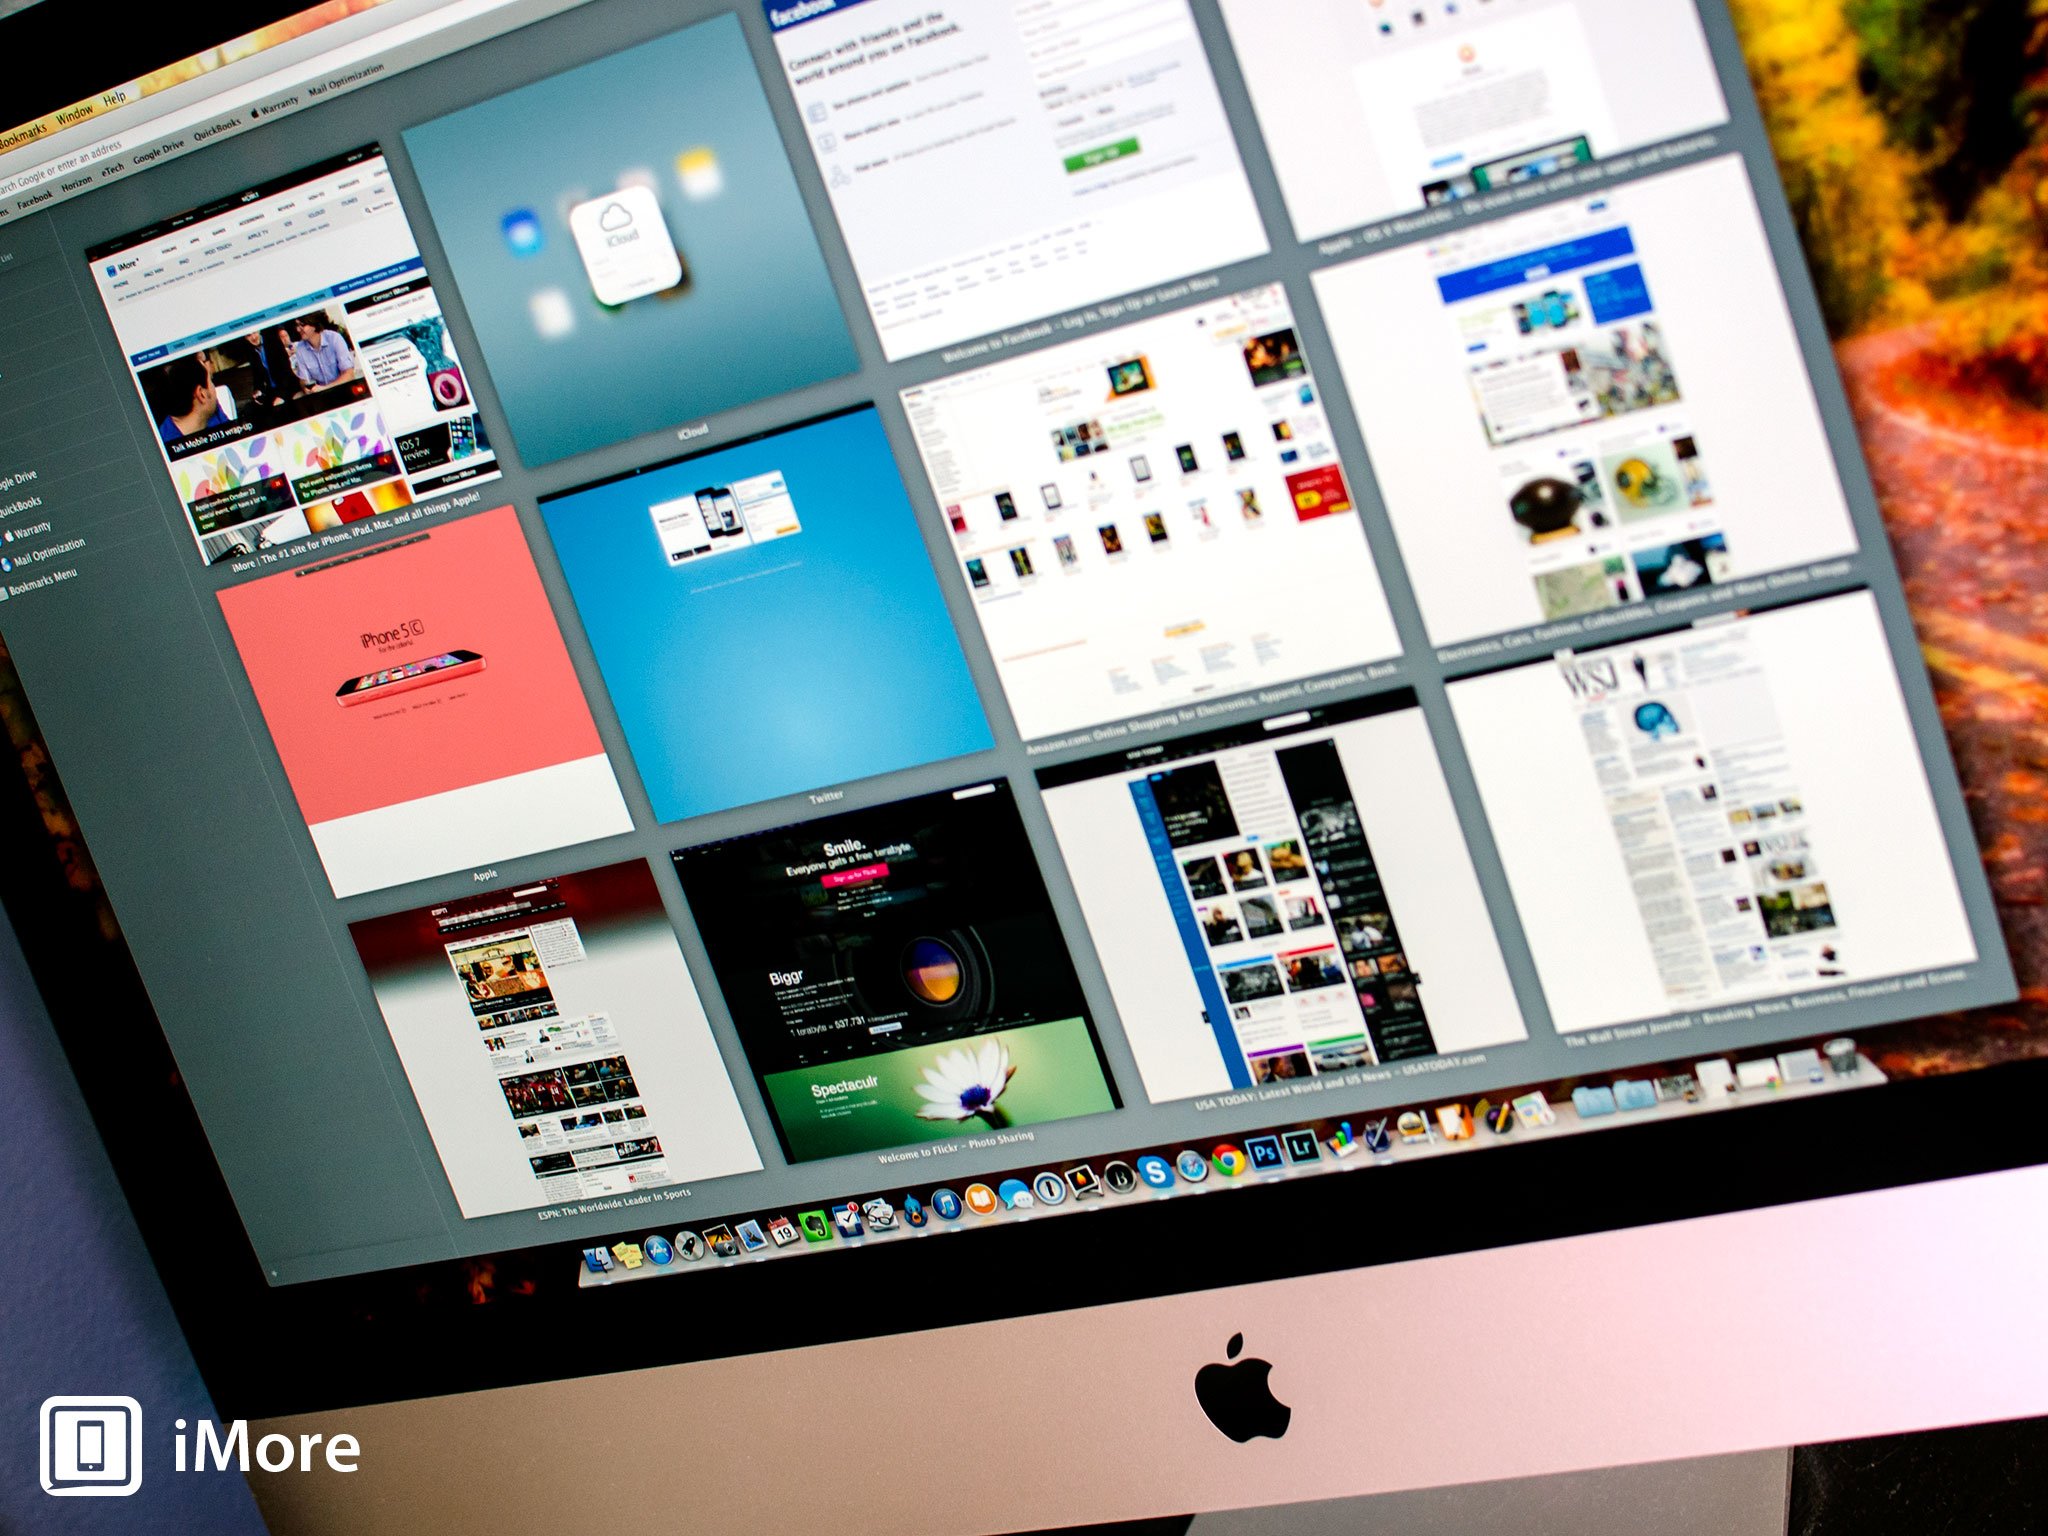 How to manage the Top Sites section in Safari for OS X Mavericks